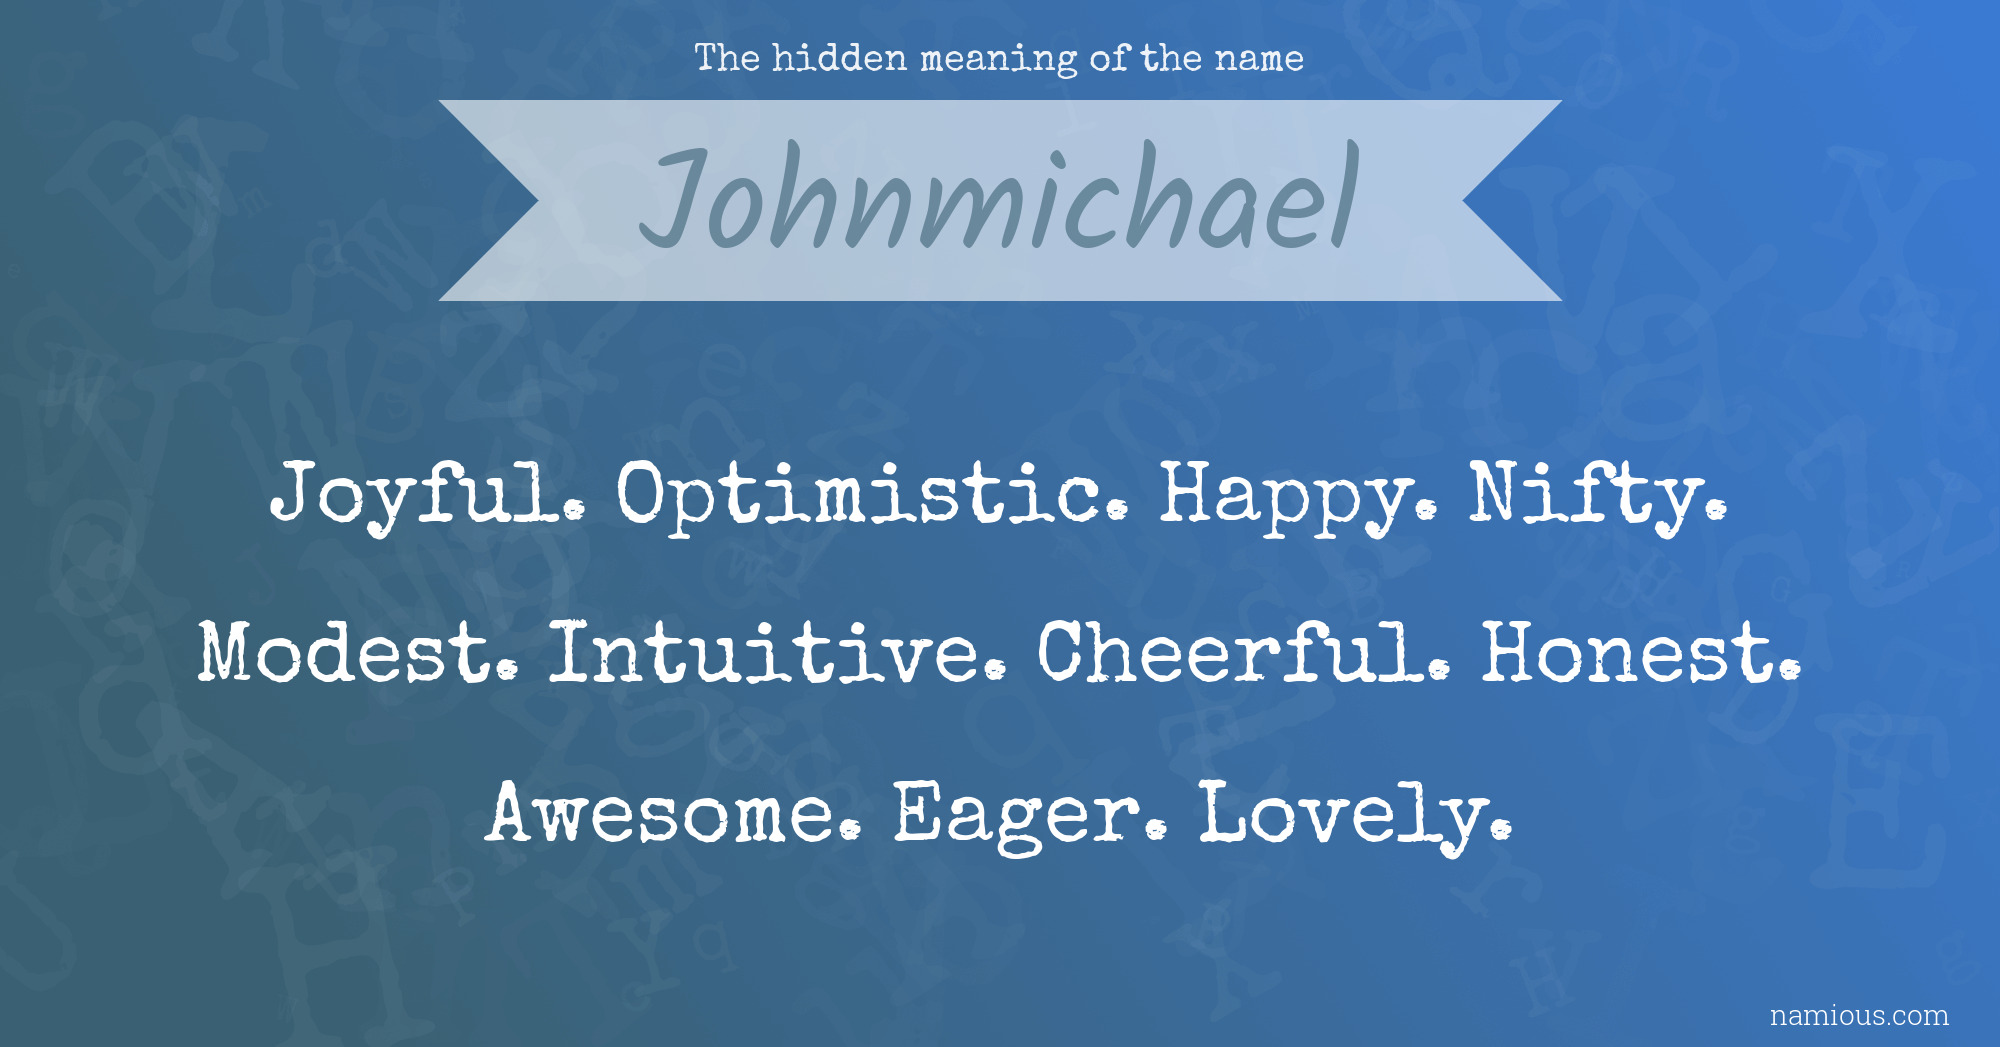 The hidden meaning of the name Johnmichael